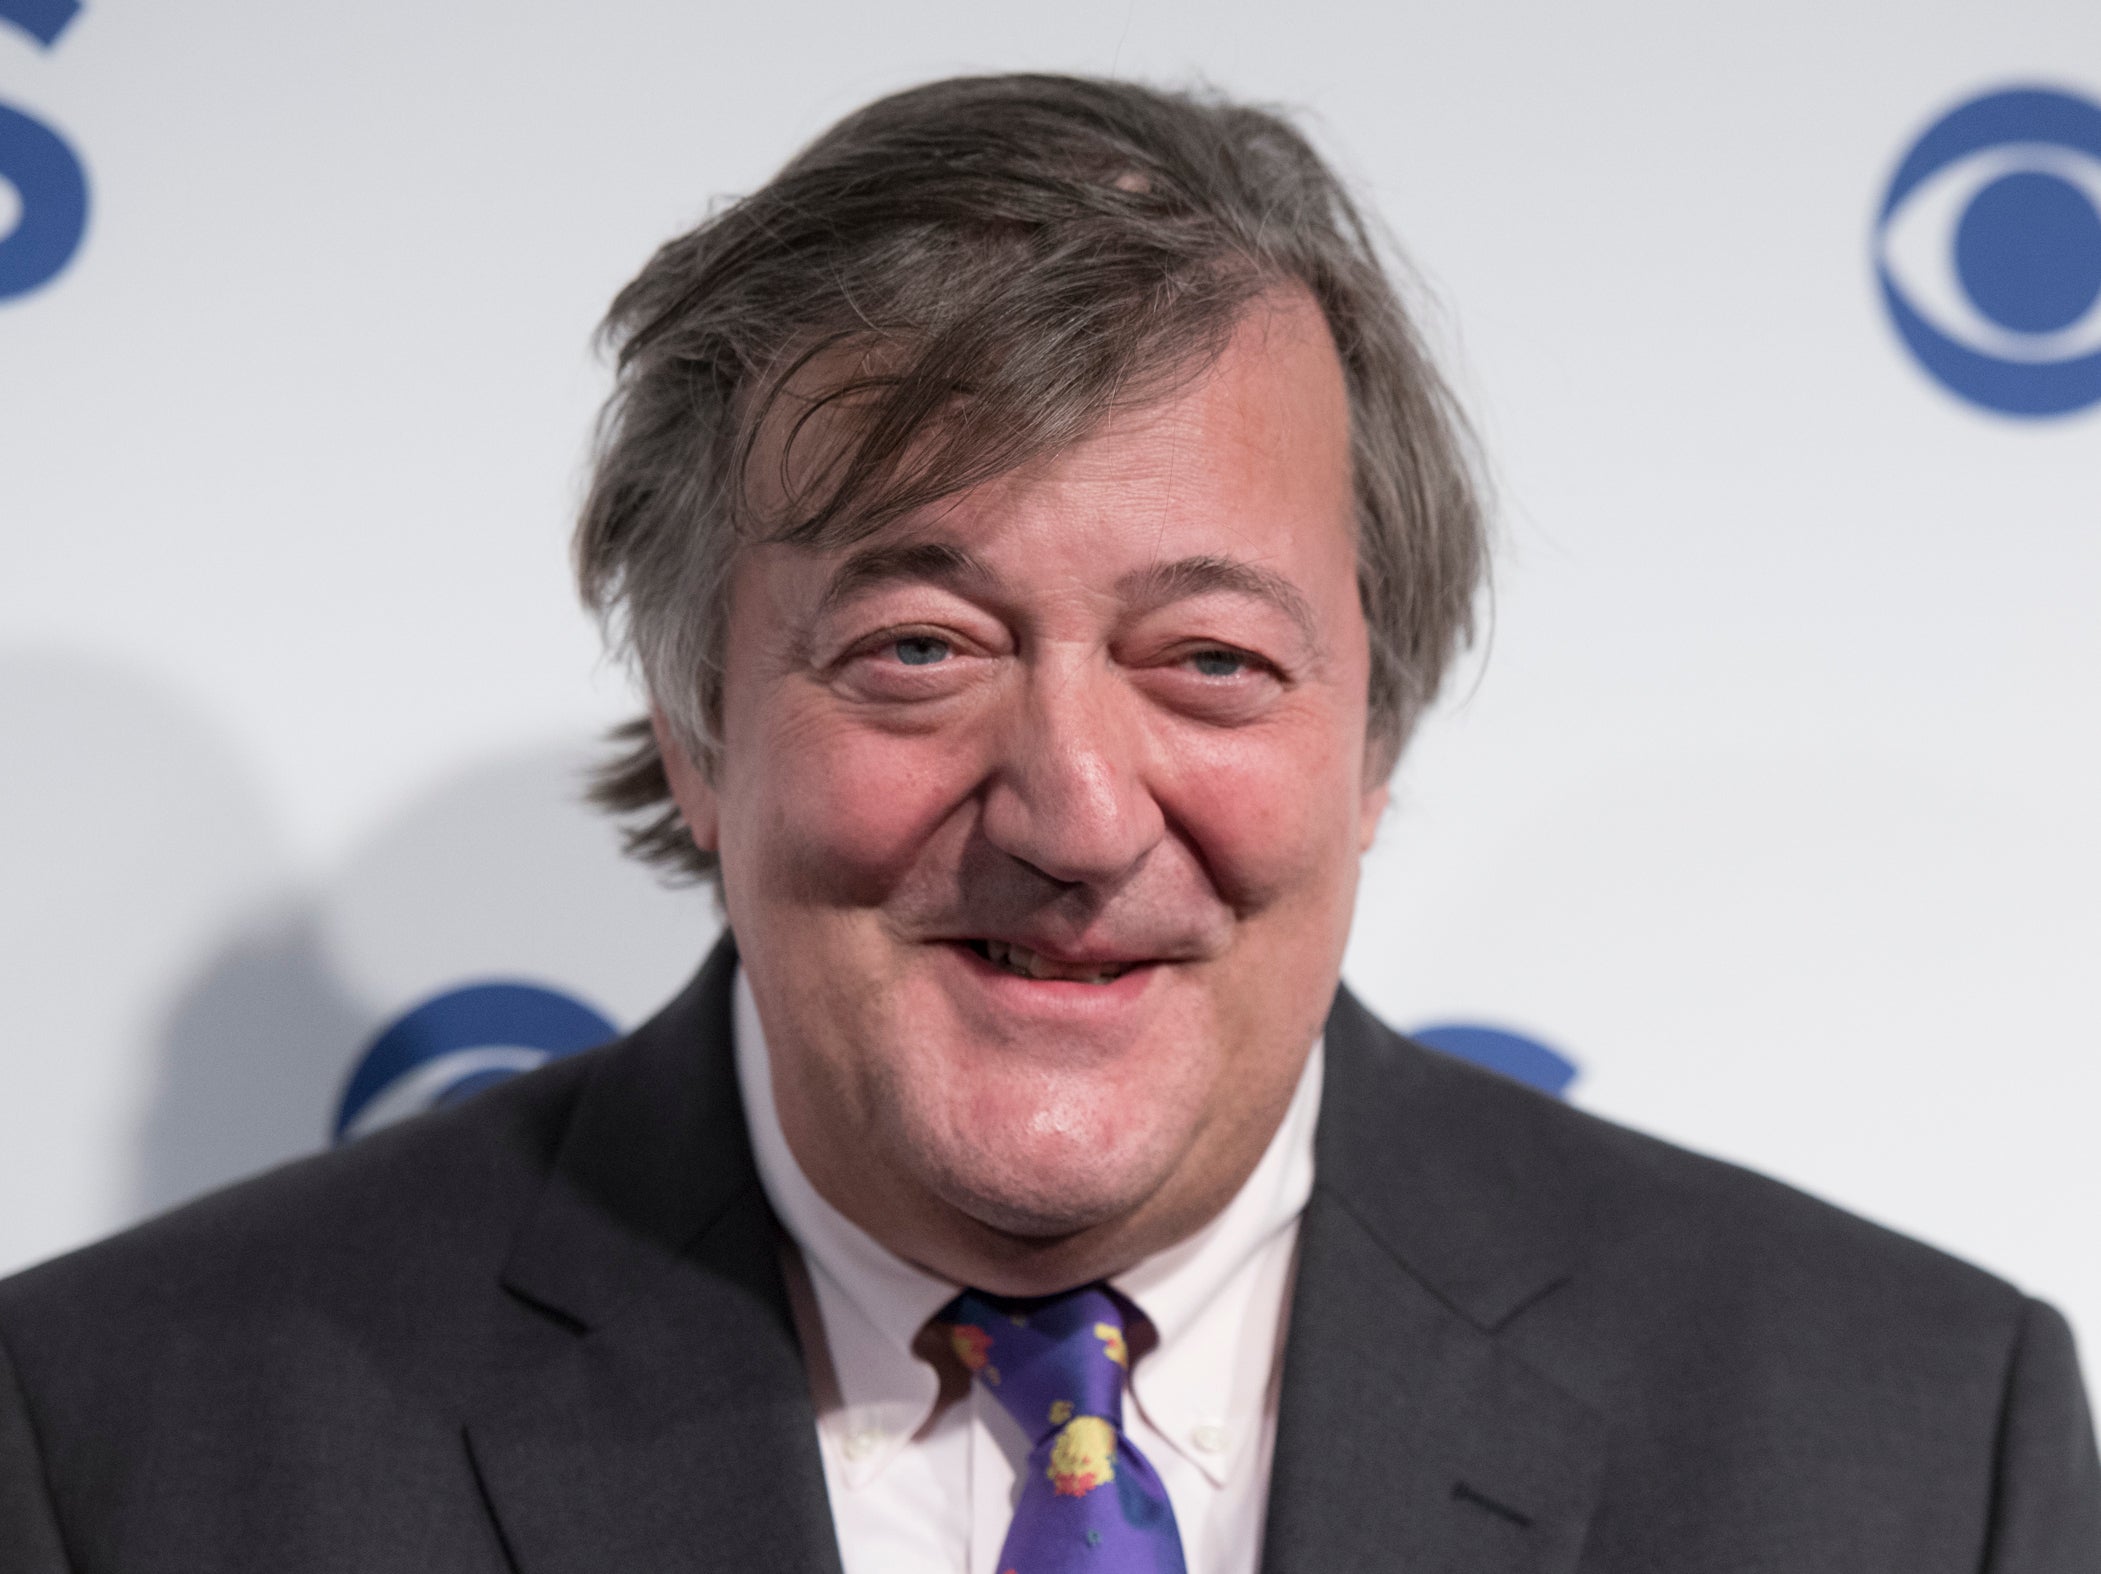 Stephen Fry praised the king for sharing his diagnosis